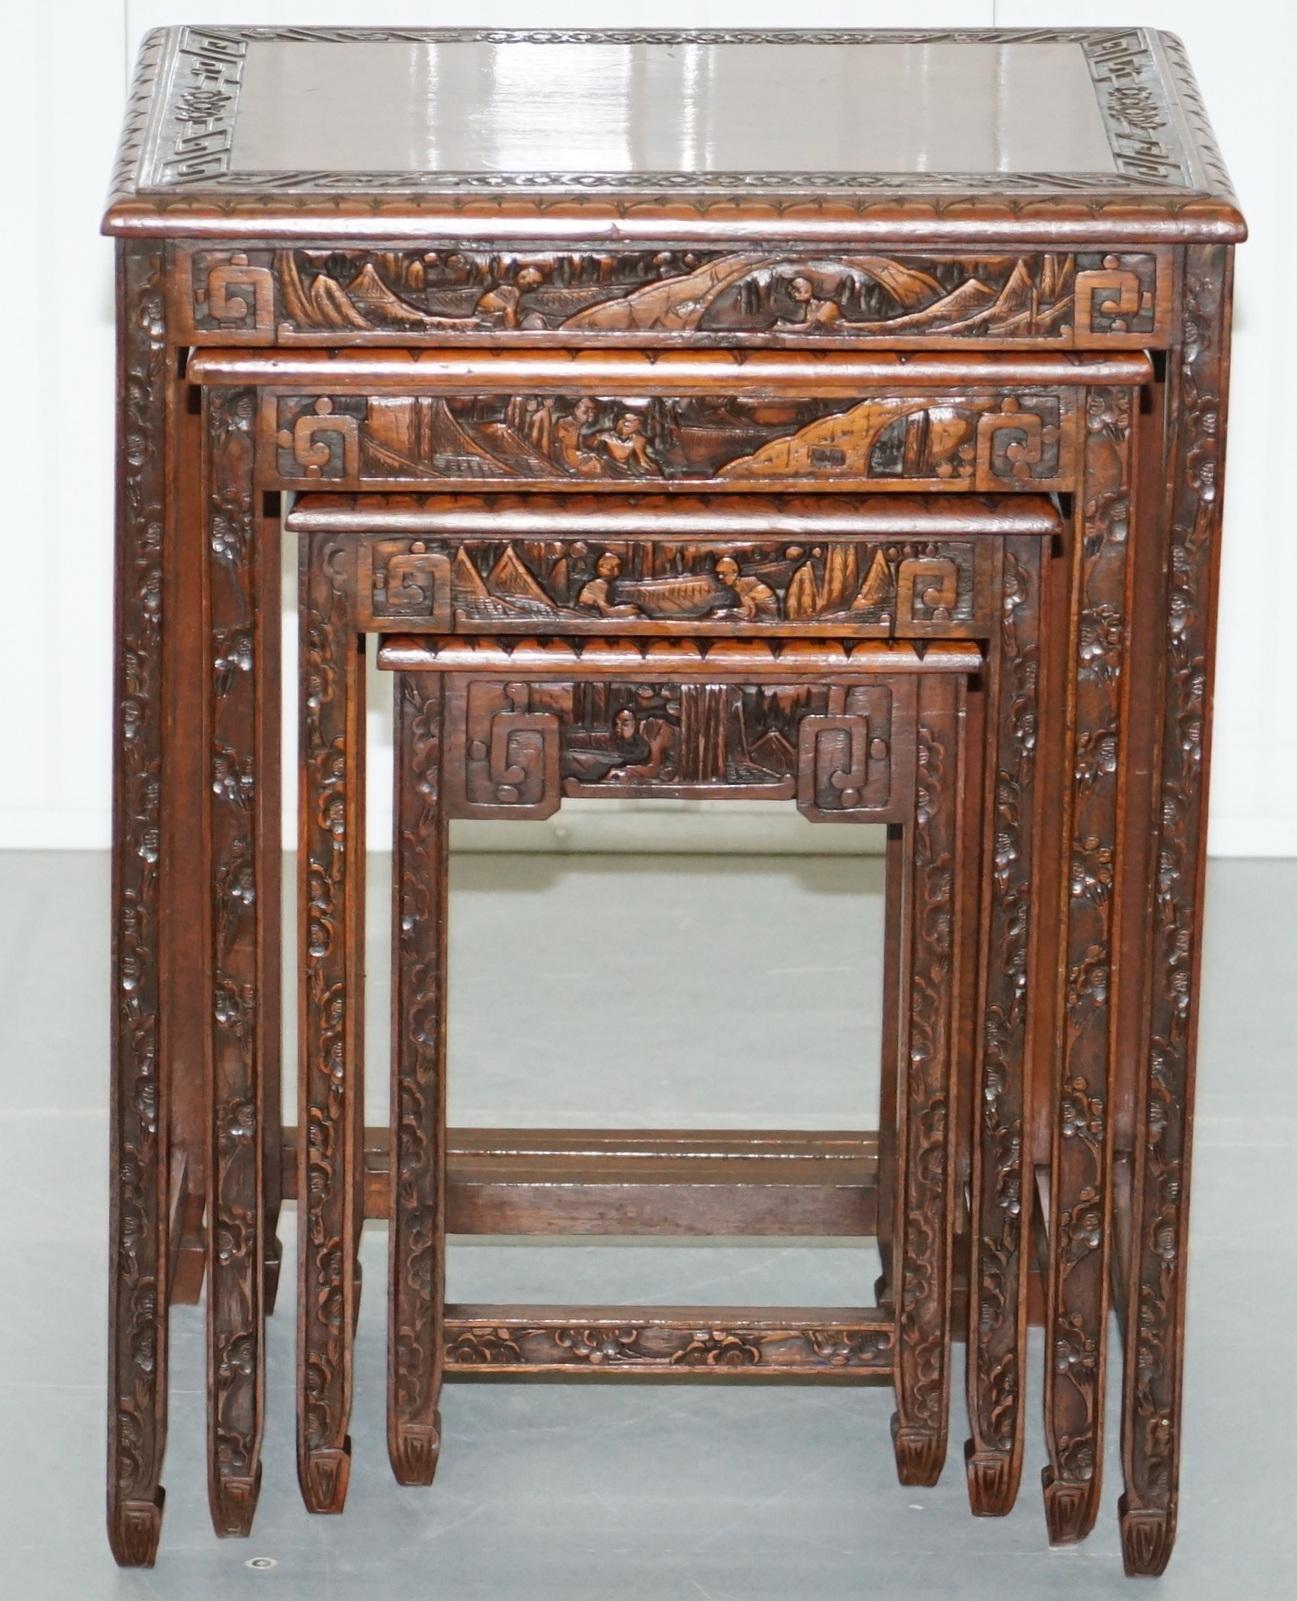 Hand-Crafted Chinese Export circa 1930s Nest of Four Tables Heavily Carved All over in Teak